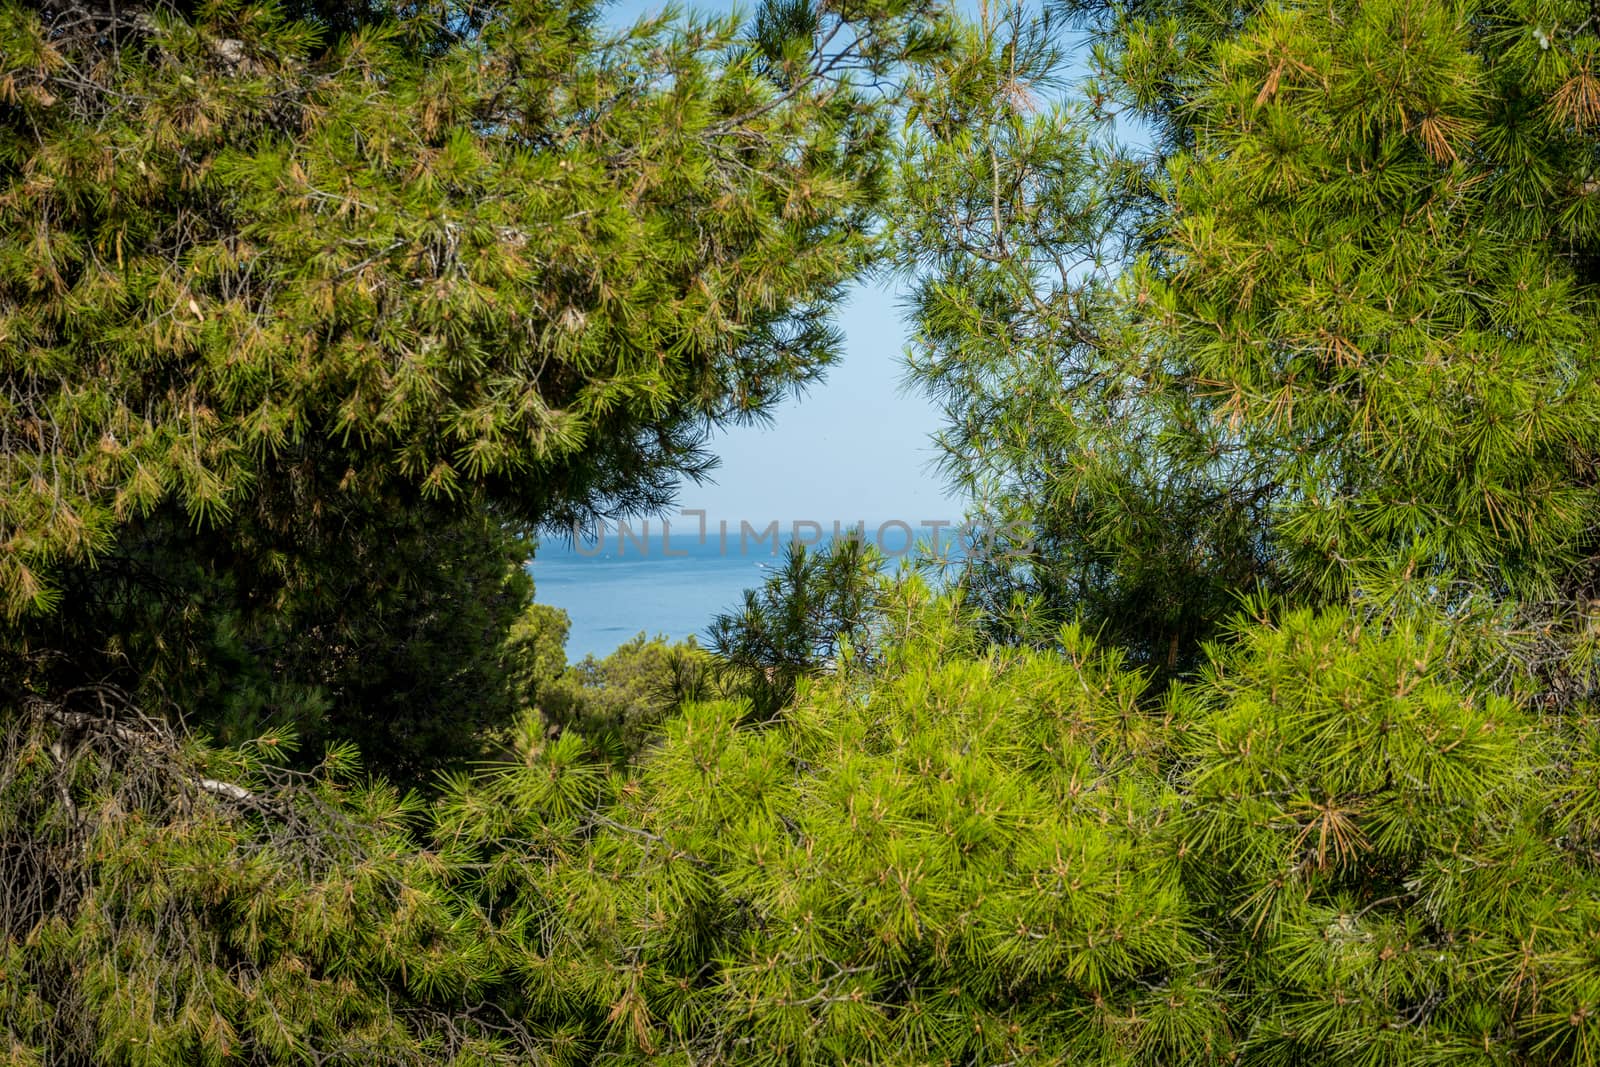 The Sea viewed through the gap between the trees in Malaga, Spain, Europe on a bright summer day with clear blue sky